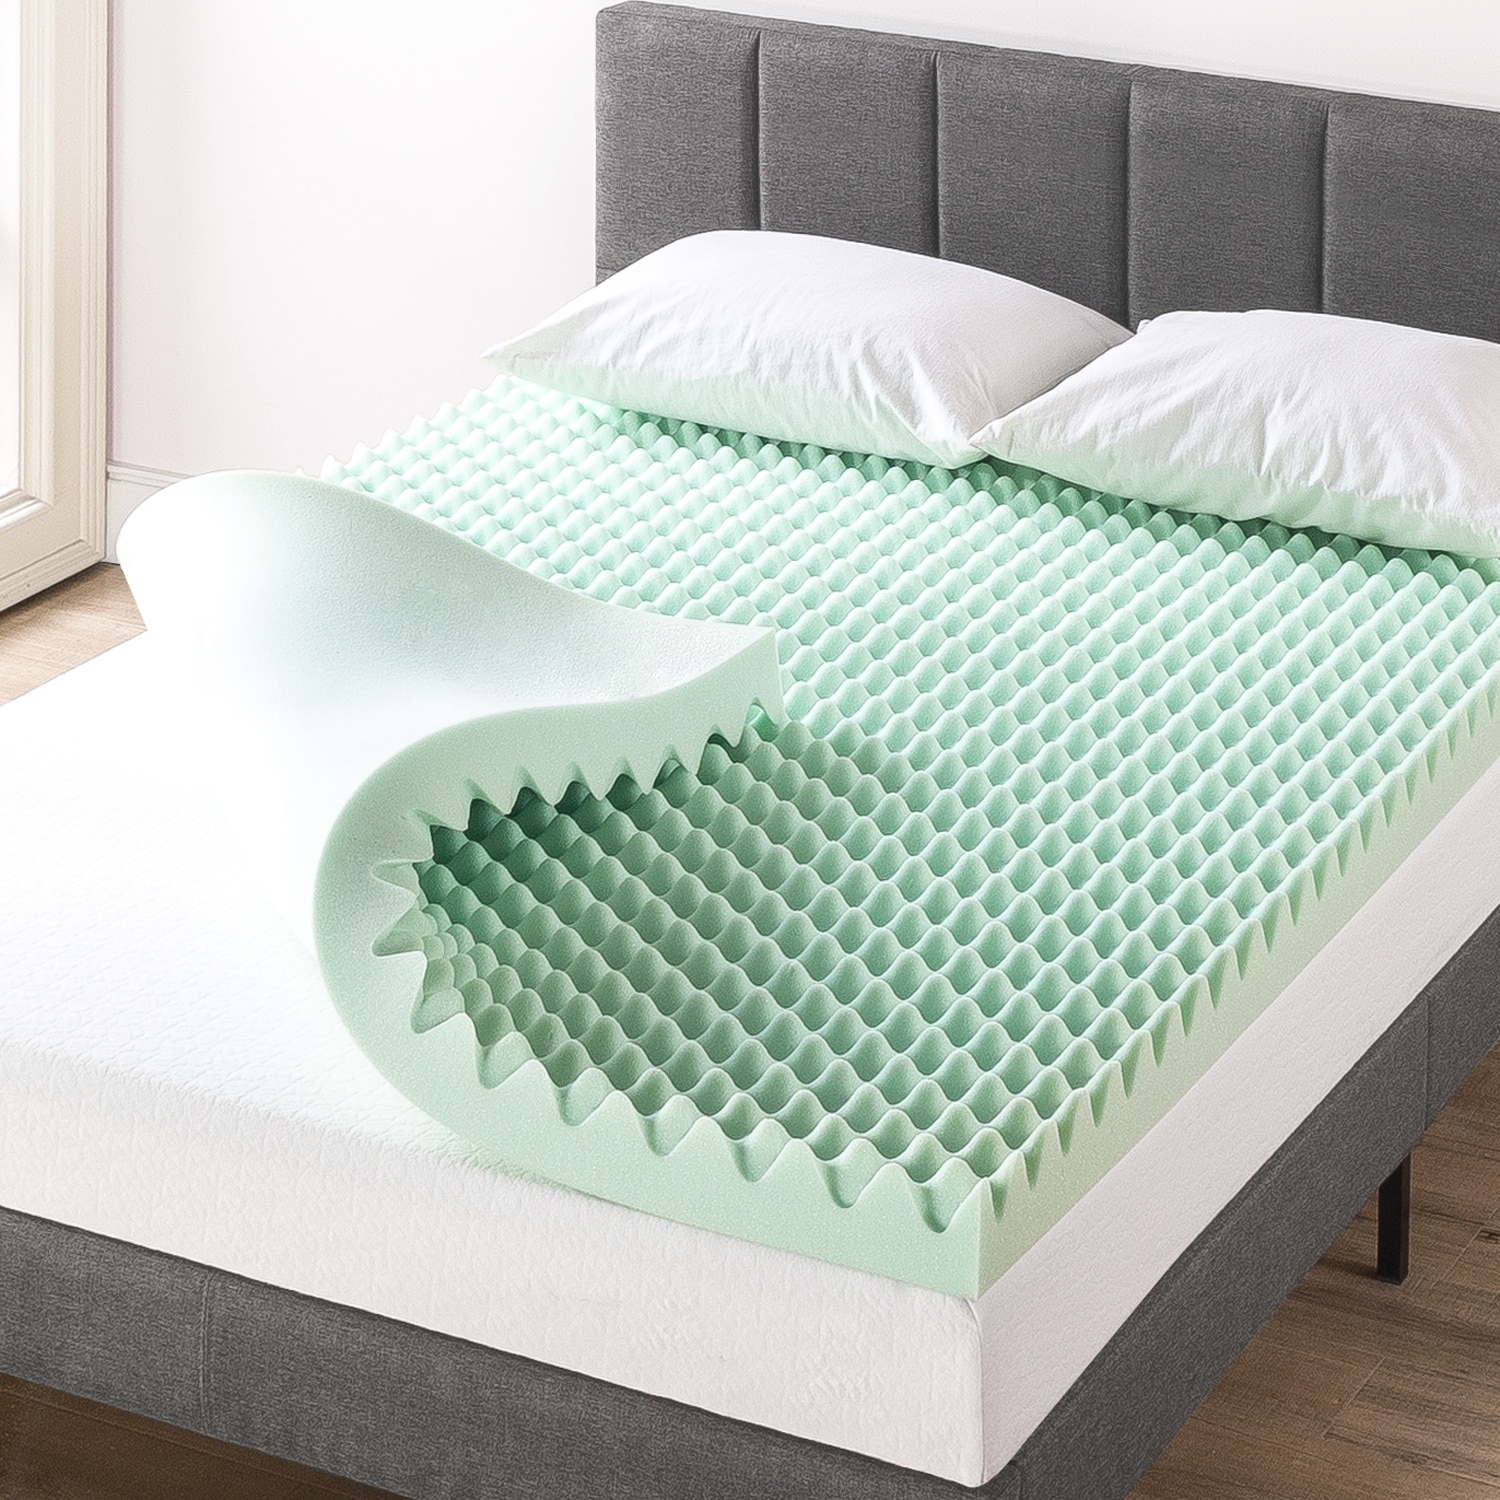 https://ak1.ostkcdn.com/images/products/is/images/direct/66381aff0f96242bb0ec47dd049dc958a4d1fc68/4-Inch-Egg-Crate-Memory-Foam-Mattress-Topper-with-Calming-Aloe-Infusion.jpg